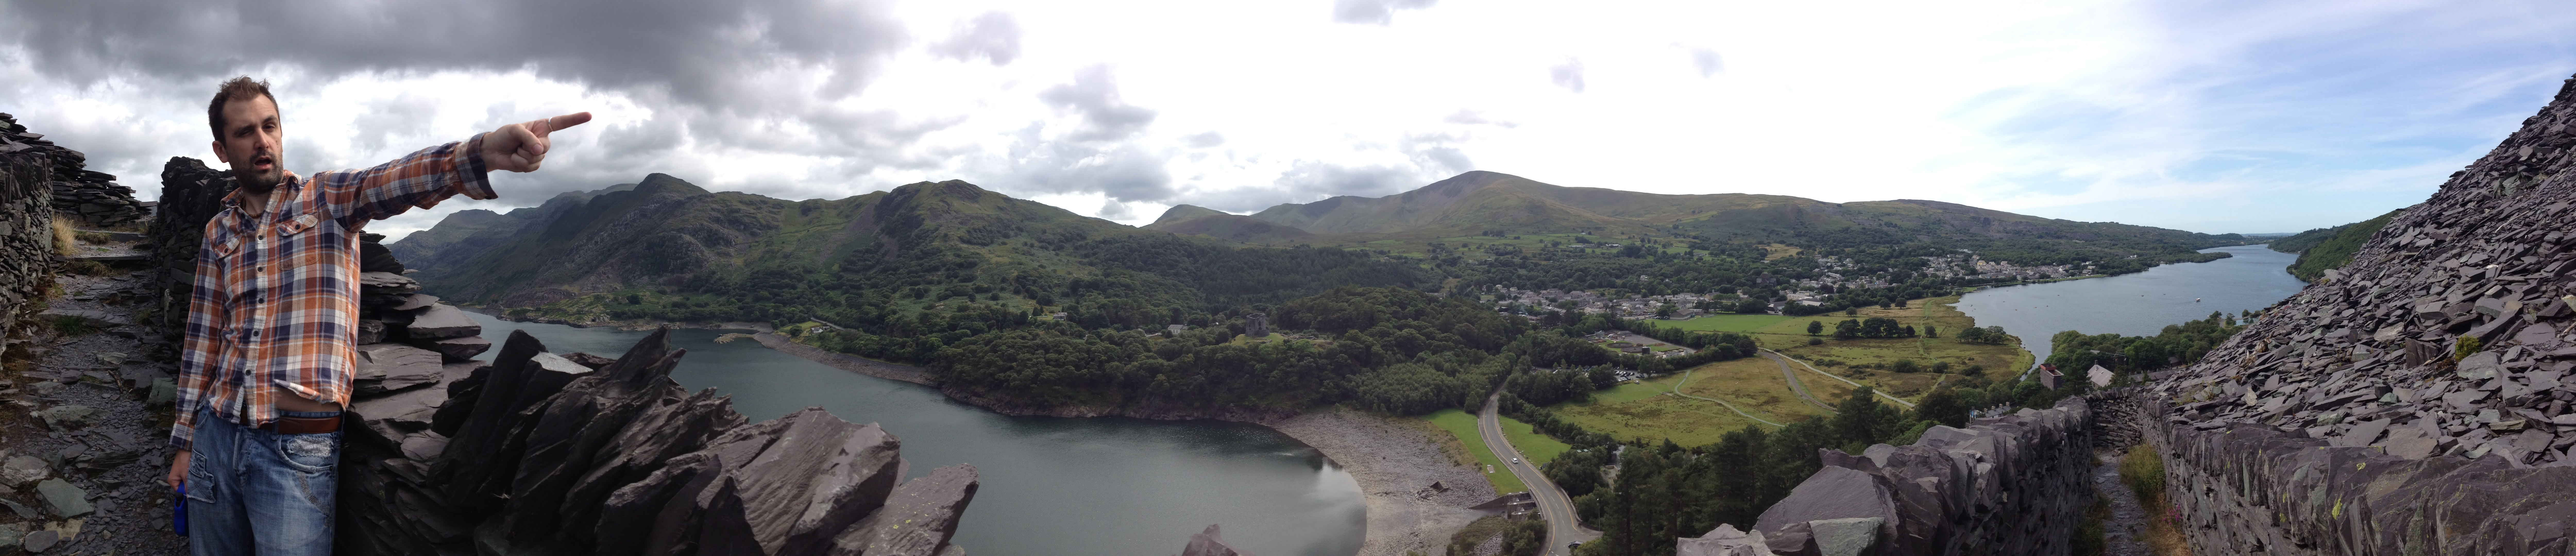 Nathan Head overlooking the Llanberis pass, Snowdonia North Wales, August 2014.